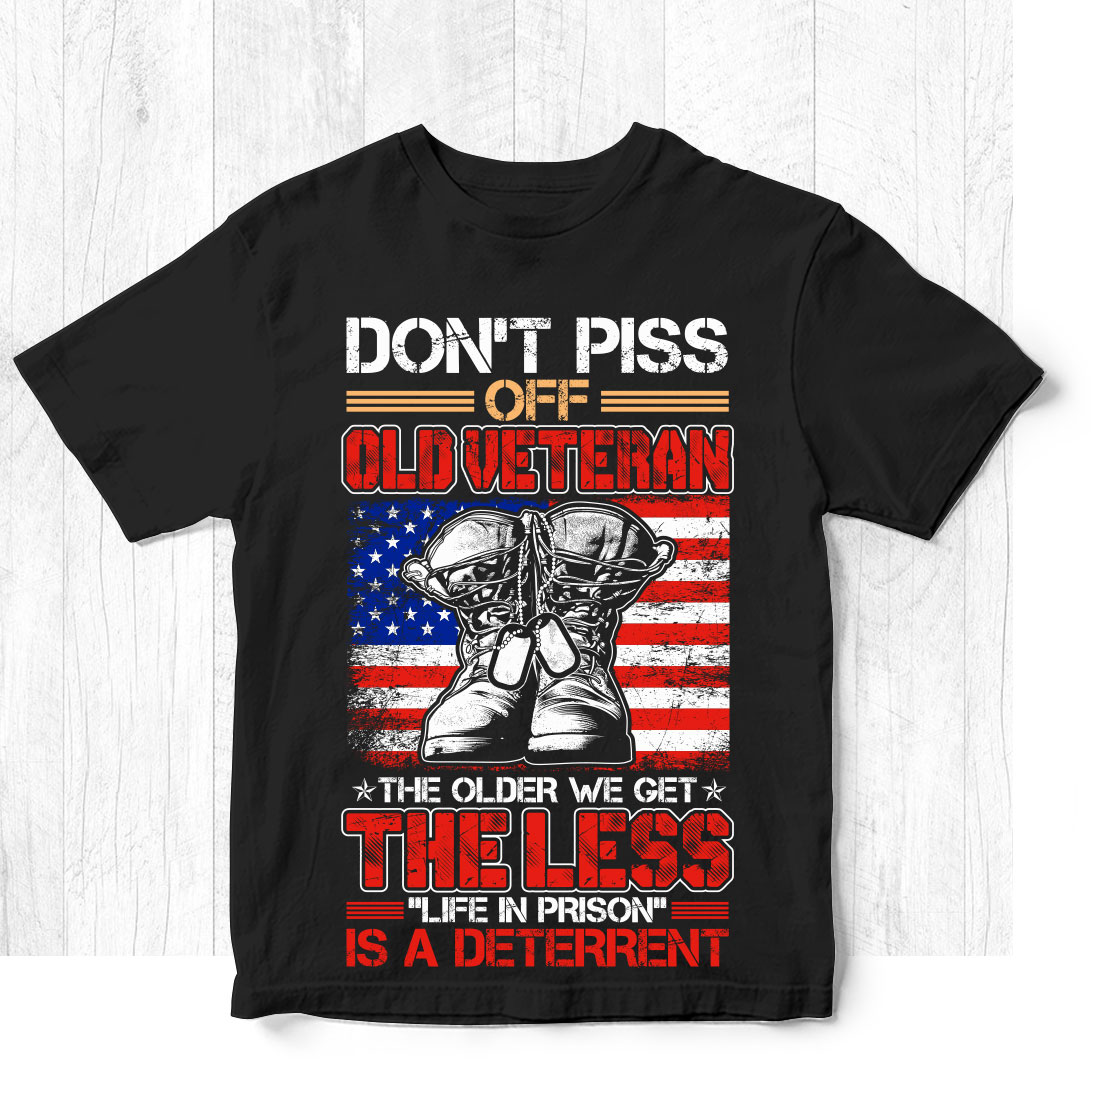 Black shirt with an american flag and an image of an old veteran.